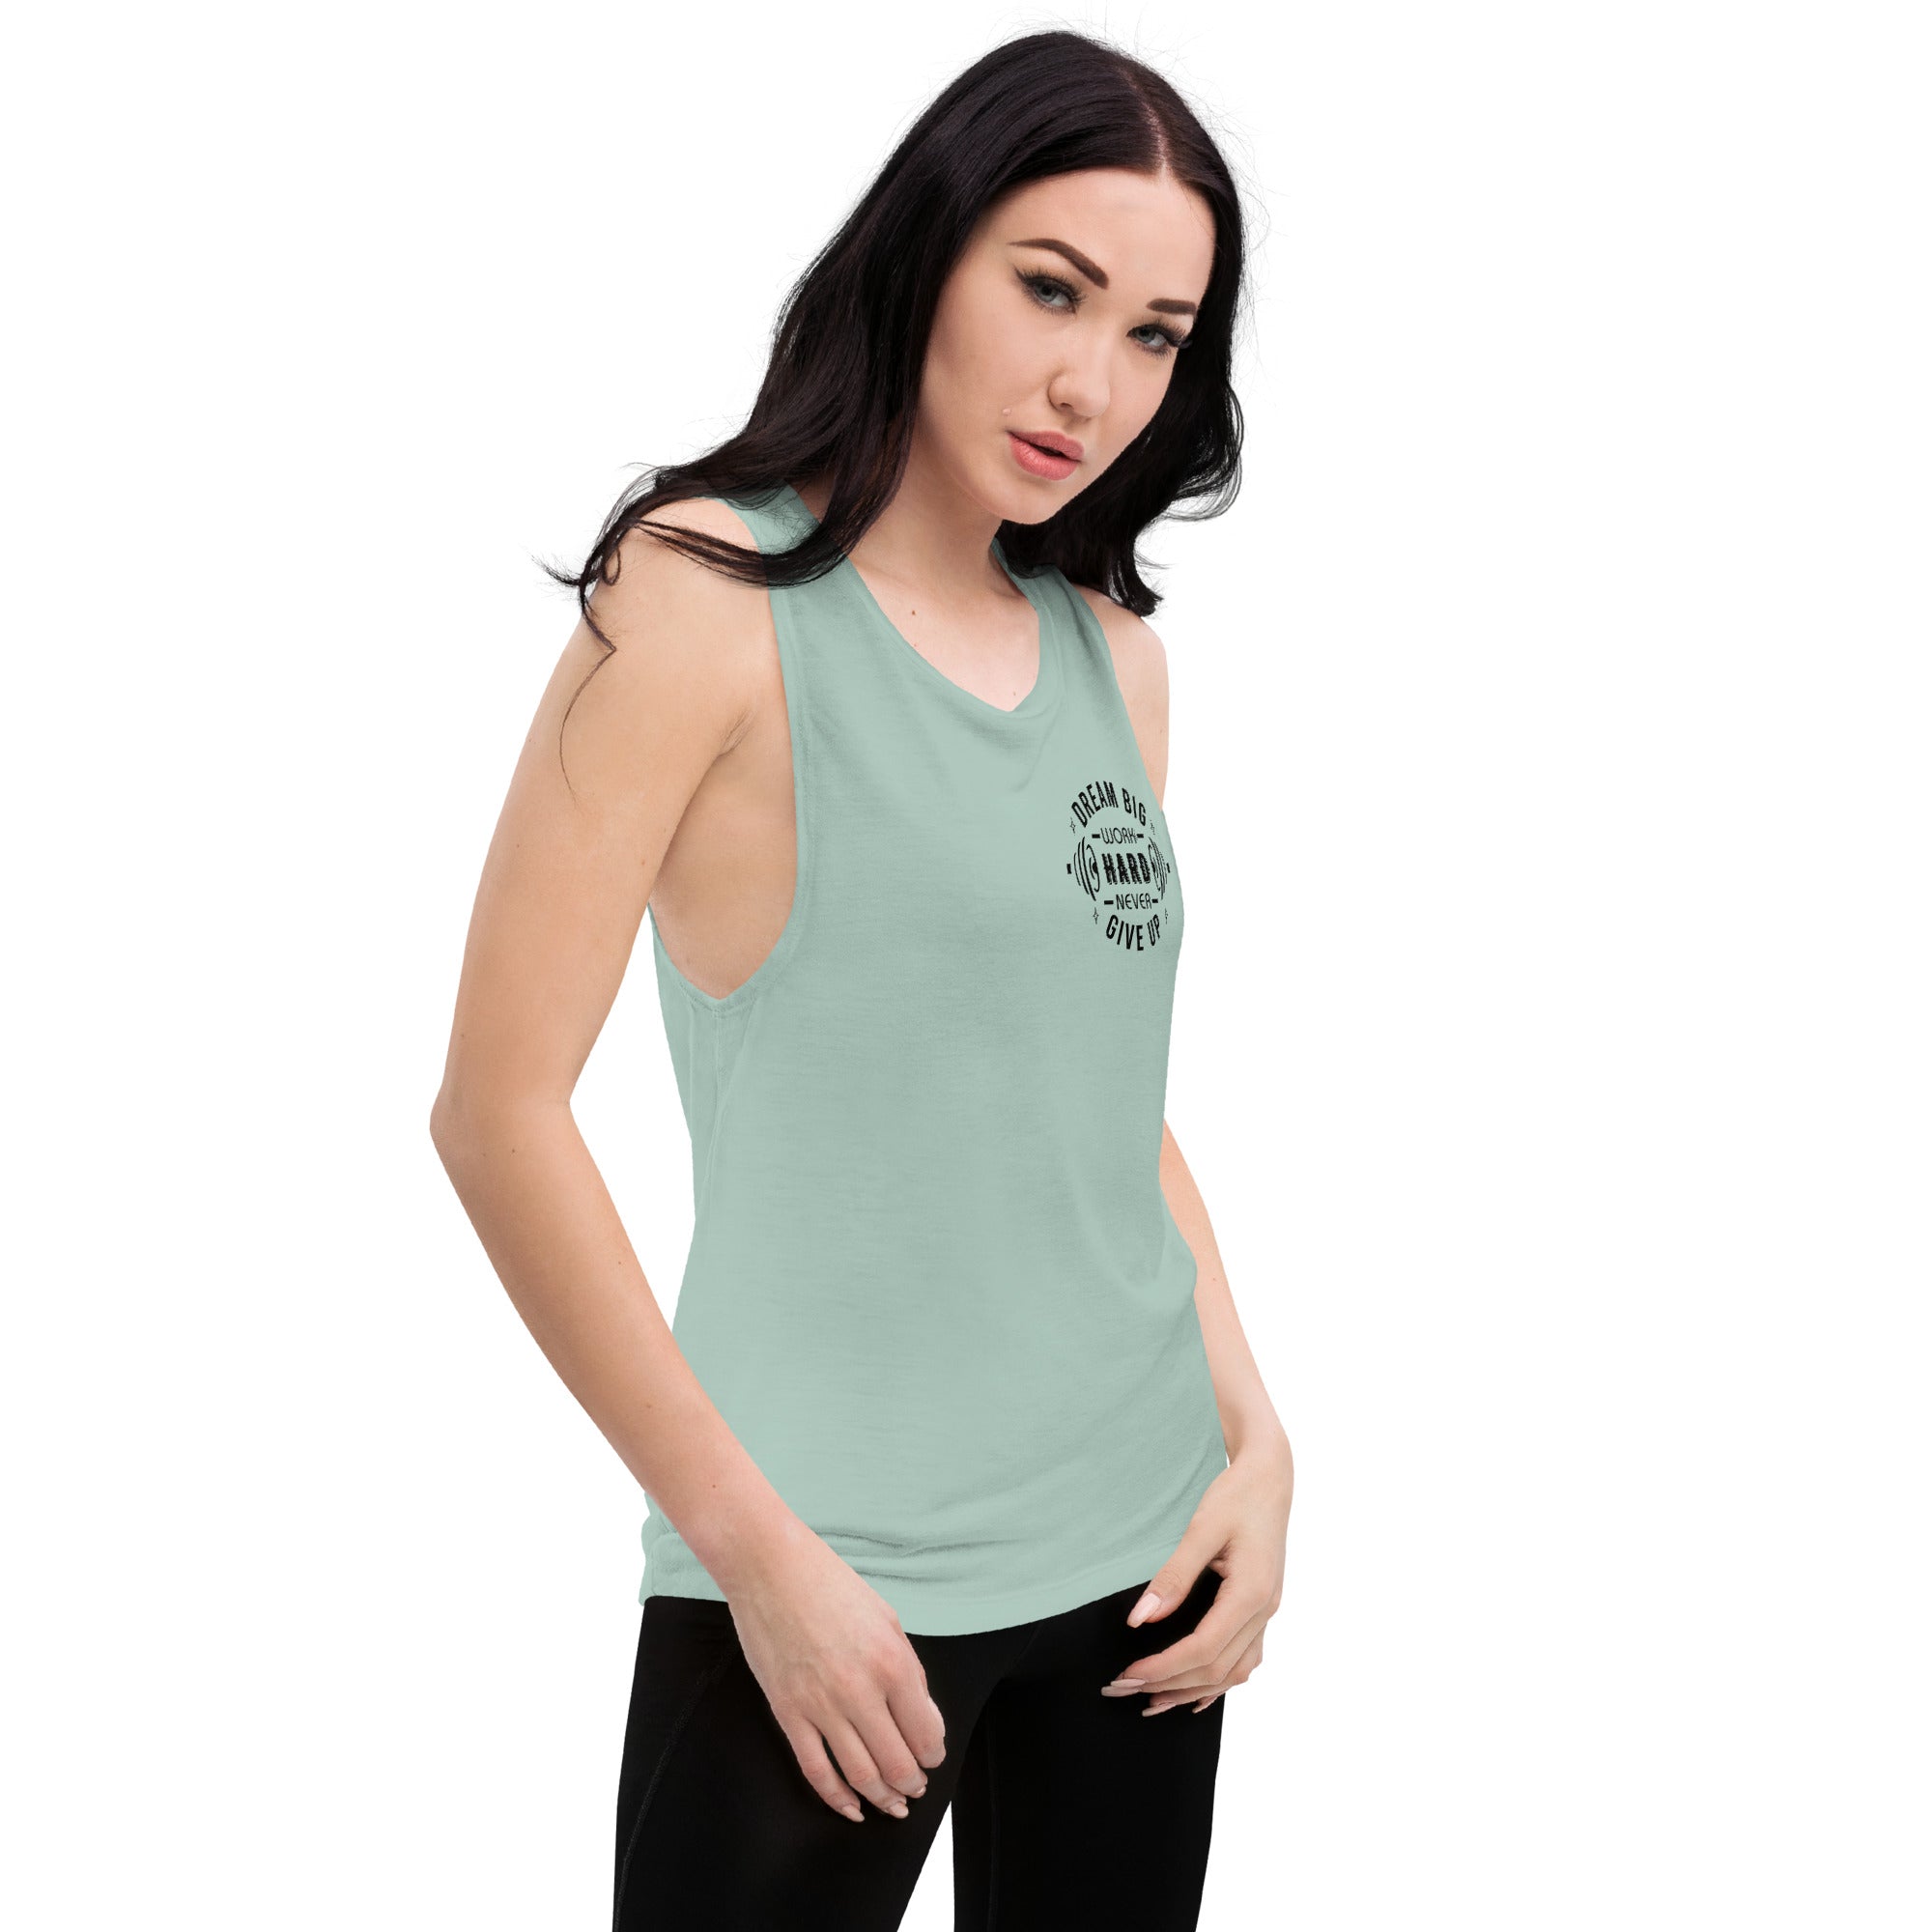 Ladies’ Muscle Tank | Women's Tank Tops Australia - Revive Wear     Women's tank tops Australia. Low-cut armholes. Great for Workouts, Yoga, and Running. 10 % Discount. Shop with Revive Wear for Free Delivery.